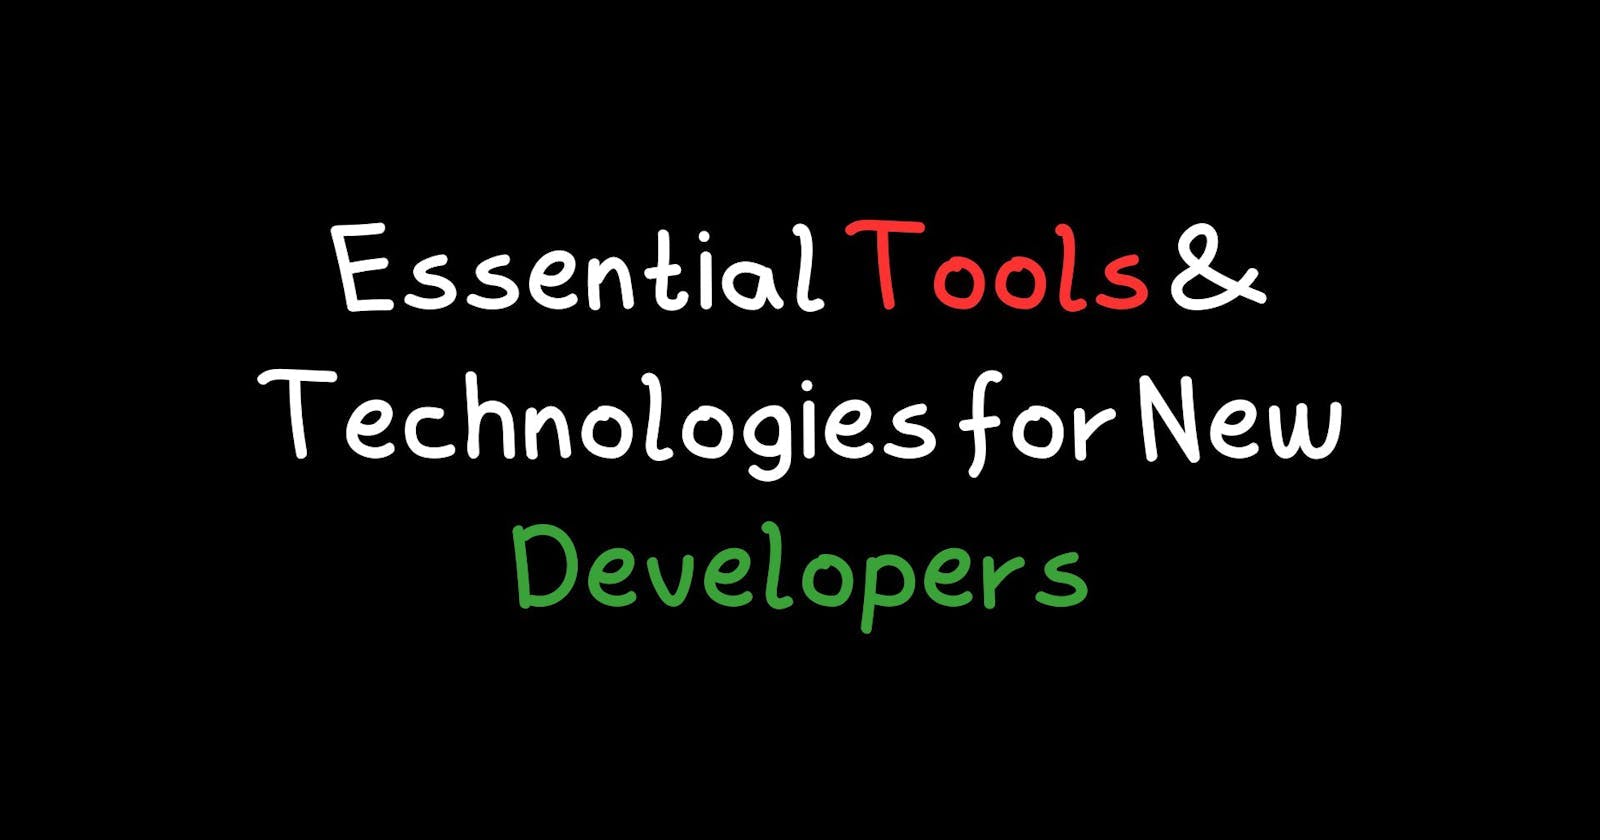 Essential Tools & Technologies for New Developers